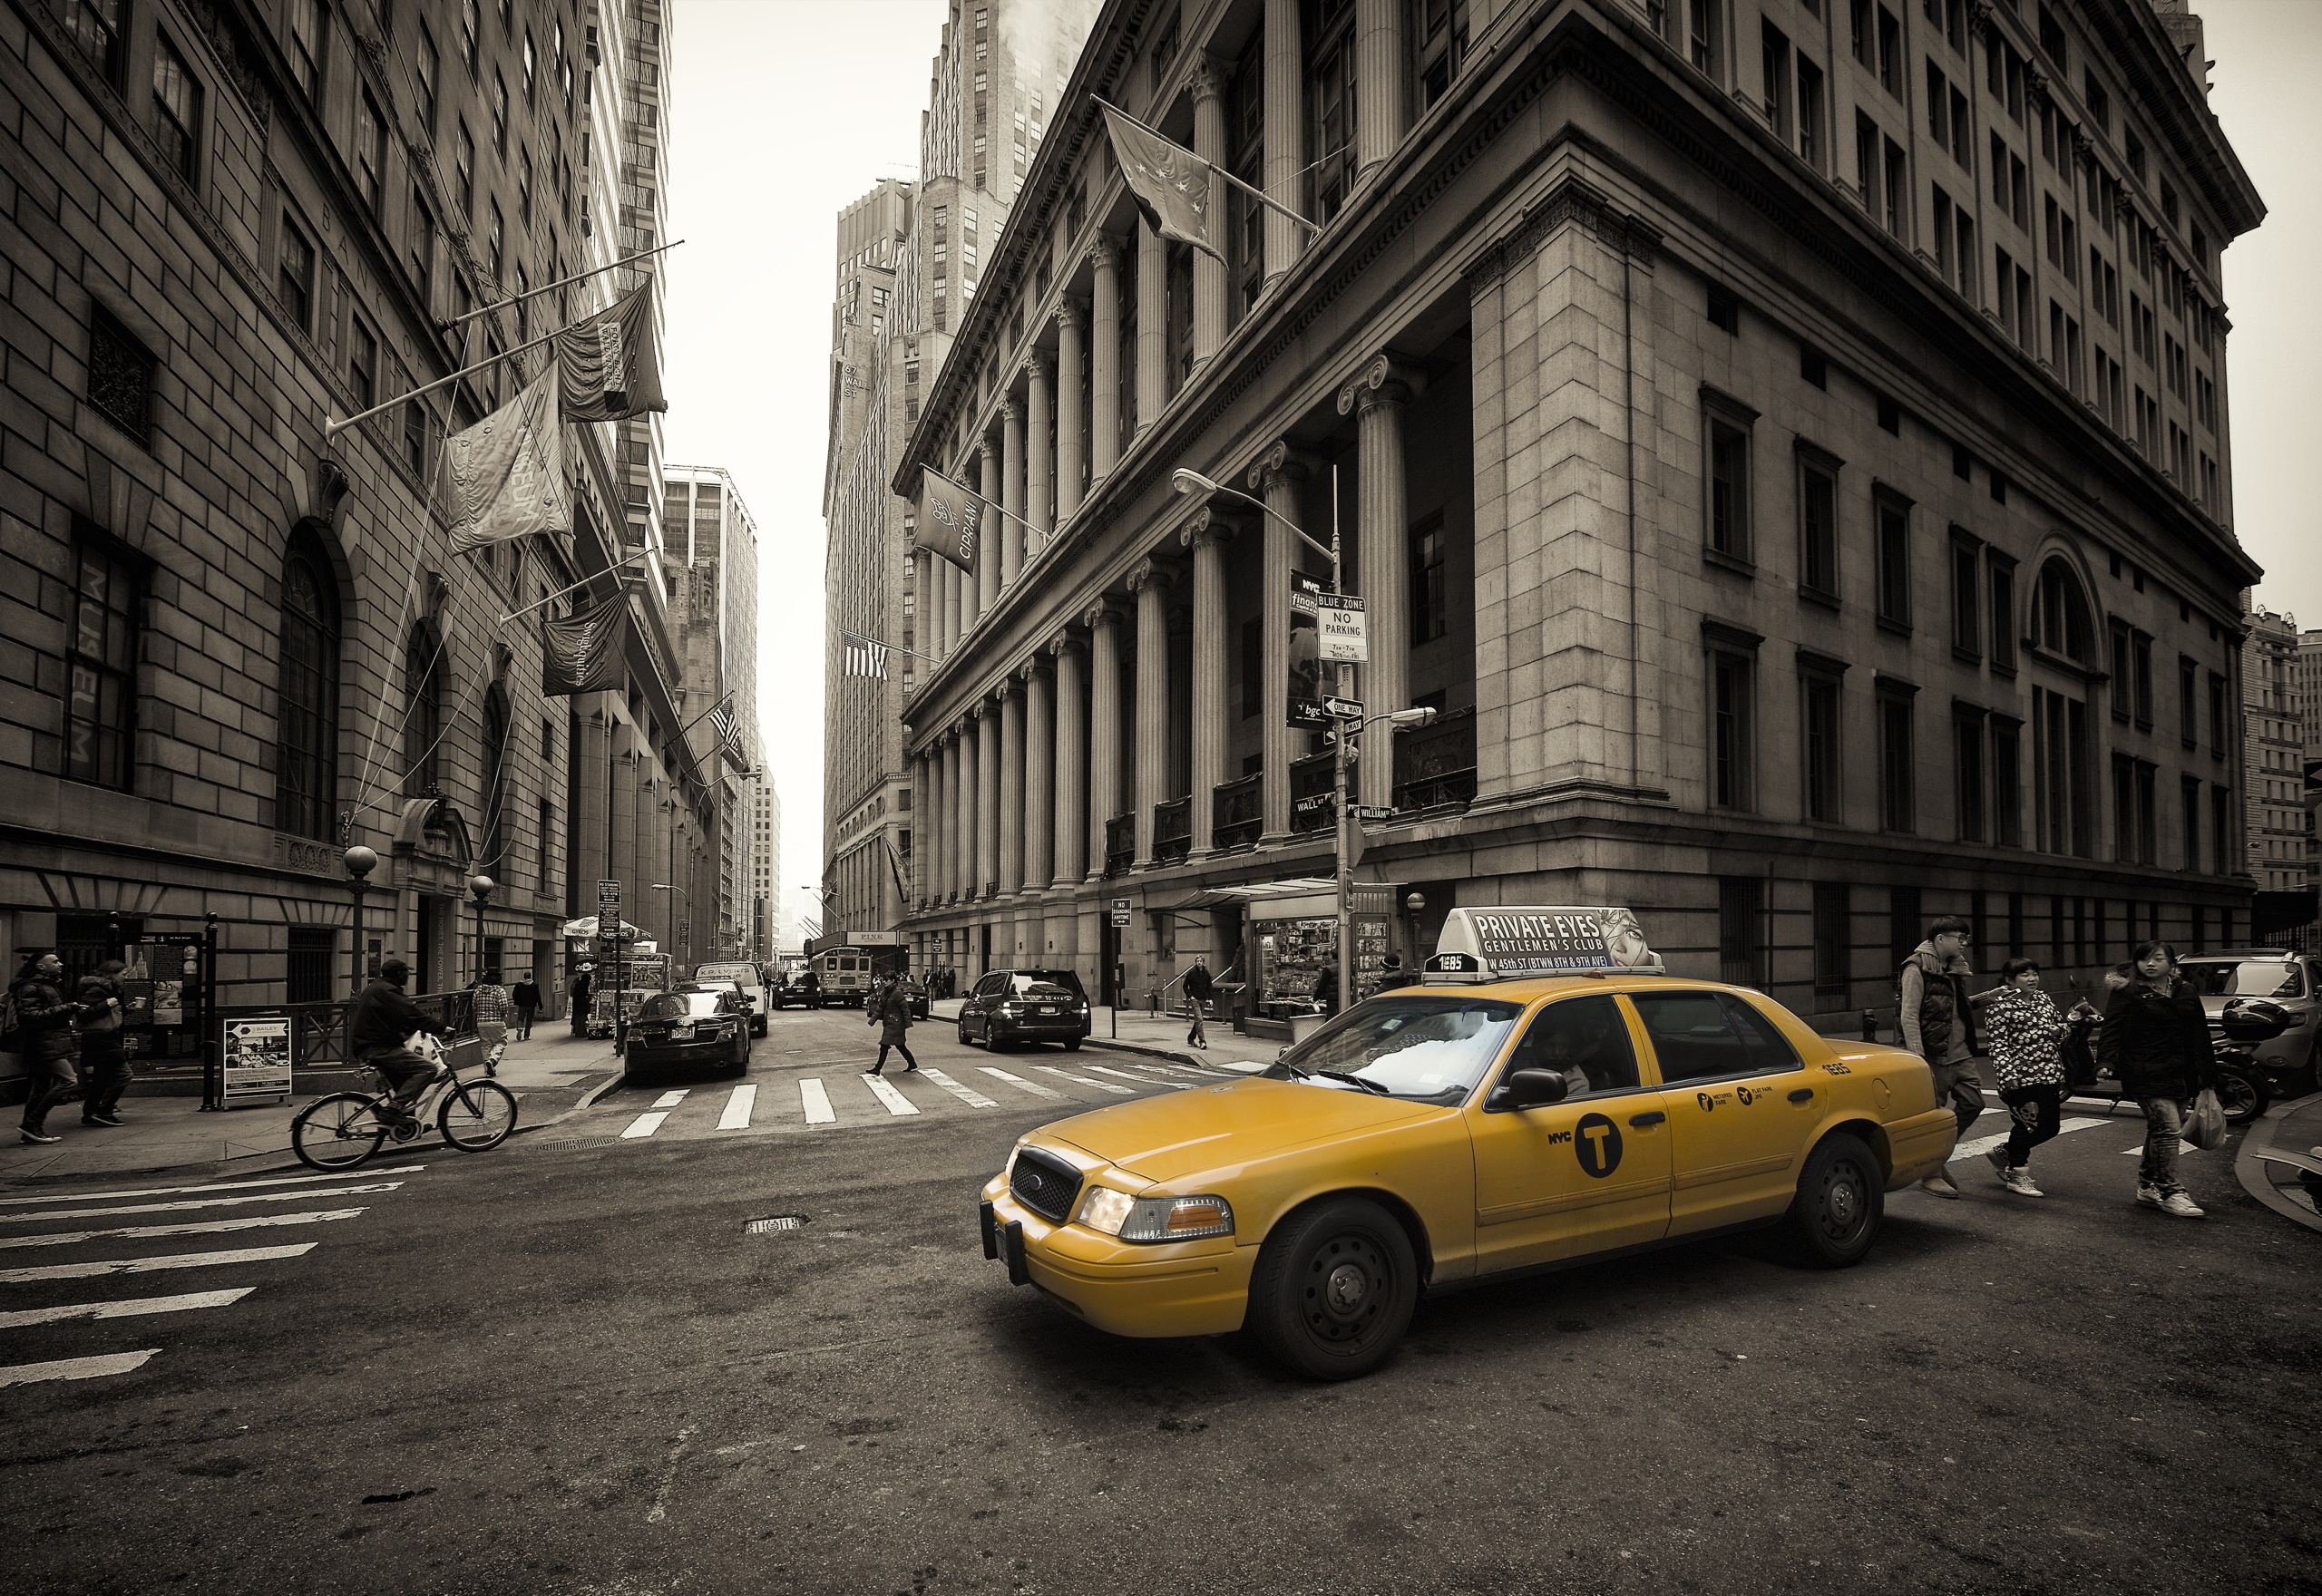 Taxi New York City Traffic Vehicle Selective Coloring Cityscape Car Sepia 2560x1760